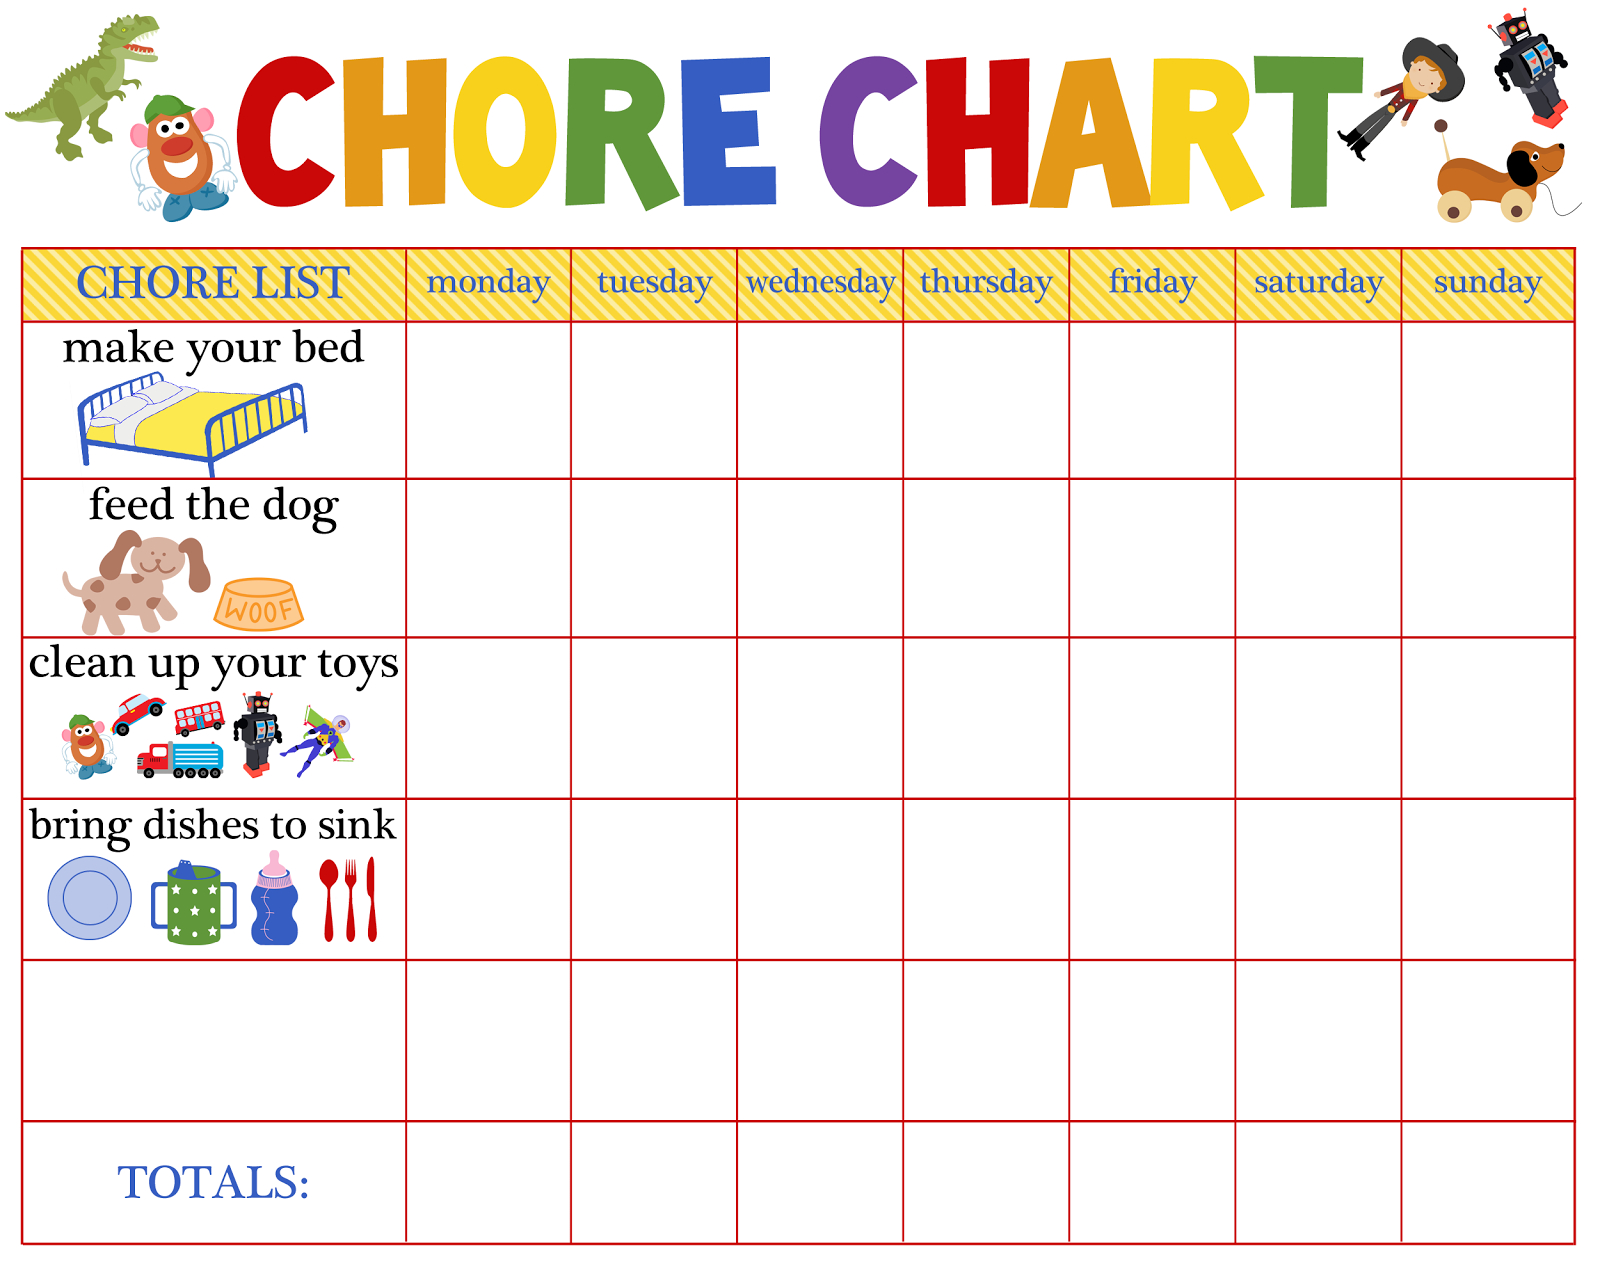 free-printable-reward-charts-for-2-year-olds-free-printable